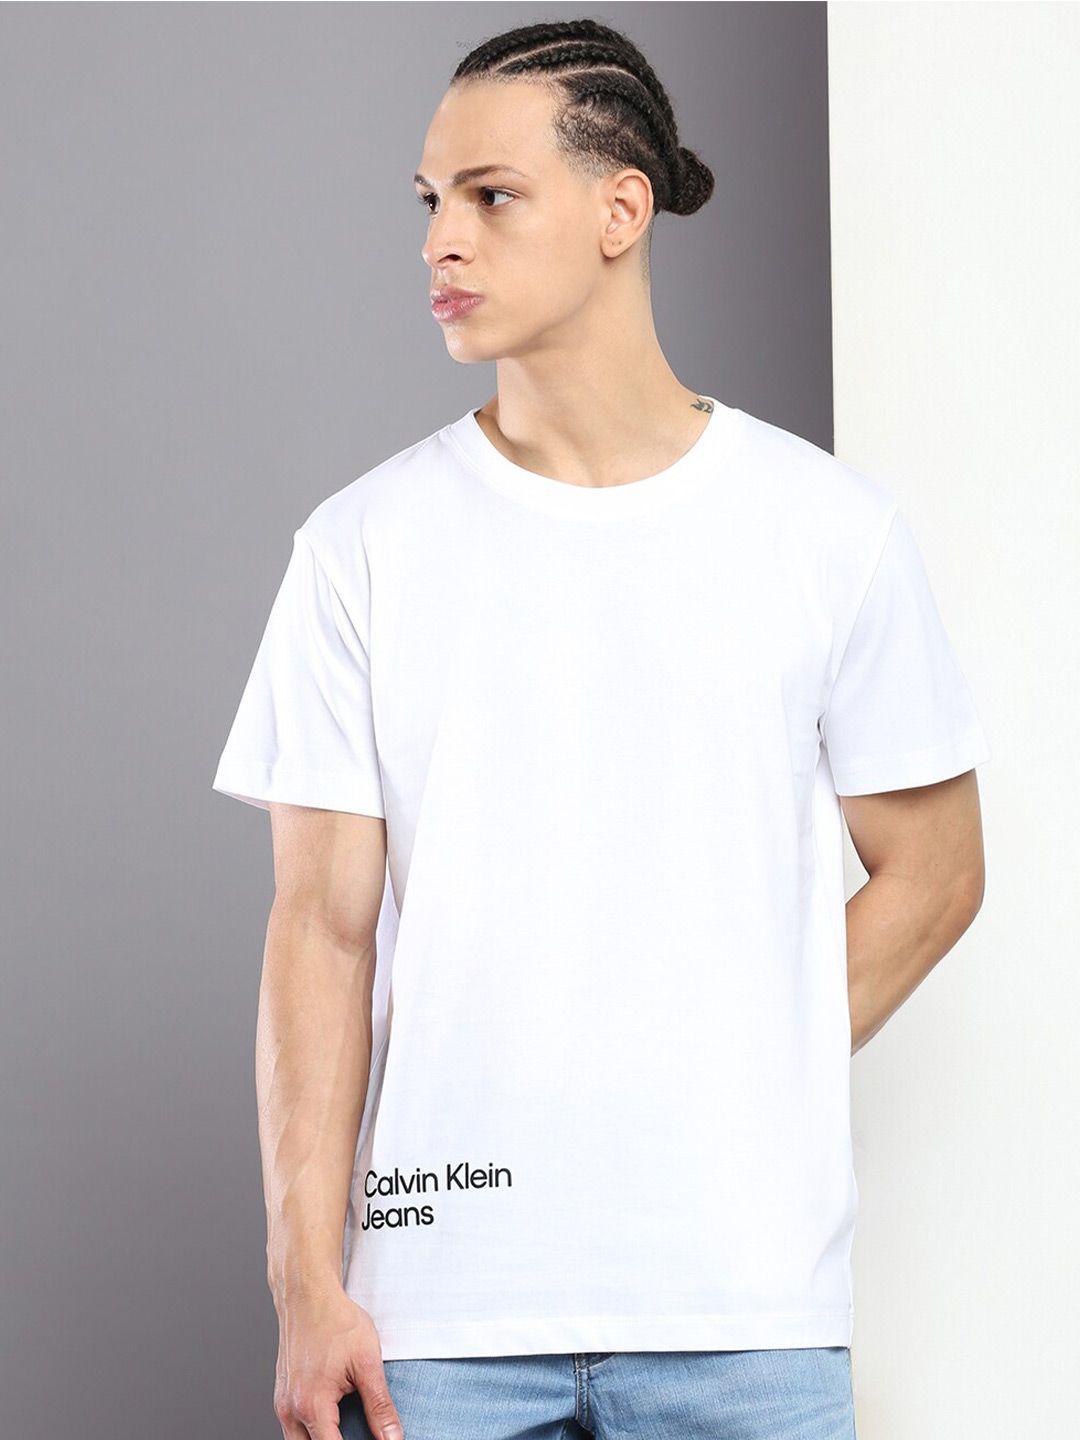 calvin klein jeans typography printed pure cotton t-shirt